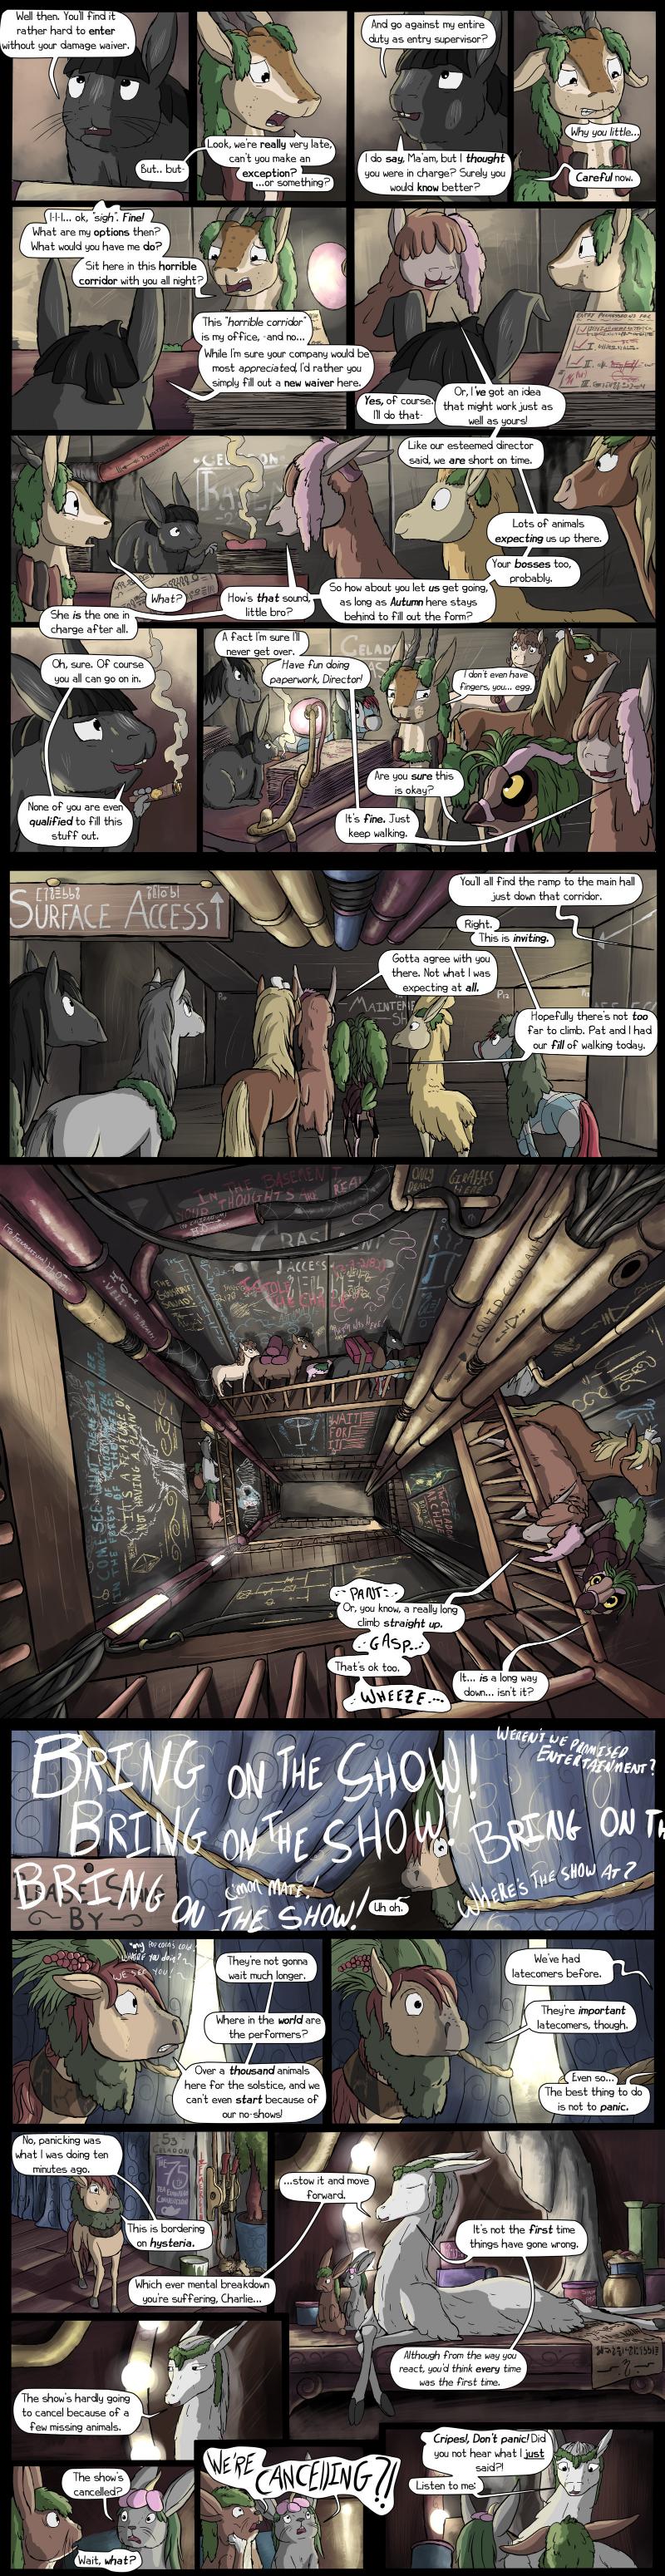 Page 13 - The Ramp-case